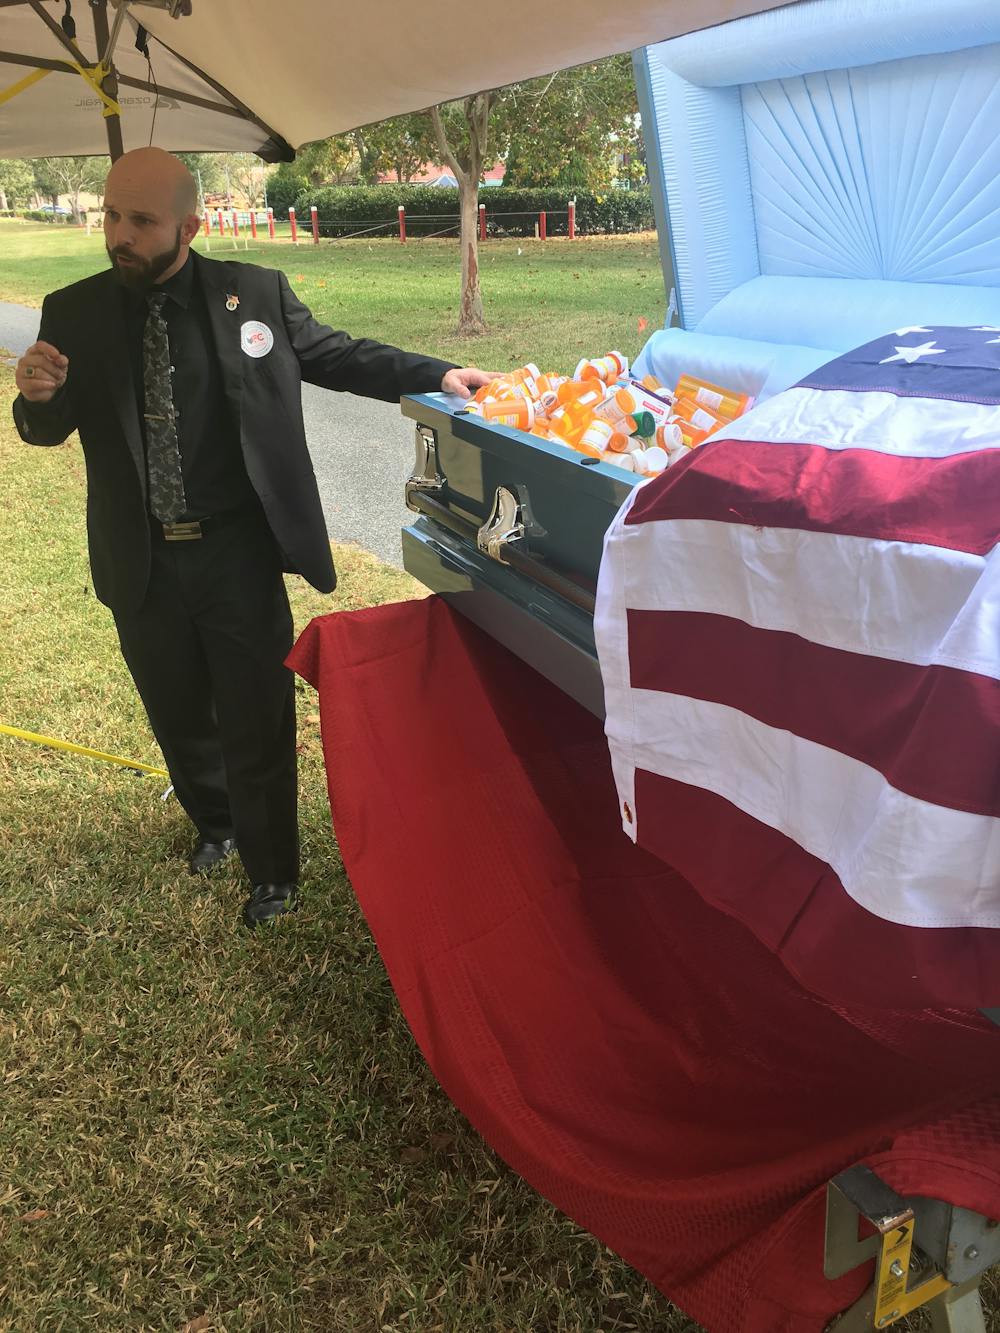 <p dir="ltr"><span>Veterans for Cannabis founder Joshua Littrell speaks about opioid deaths among veterans Saturday outside the Malcom Randall VA Medical Center, located at 1601 SW Archer Road. Littrell and four other veterans protested by filling a casket with empty prescription pill bottles. “Each one of these bottles is a brother and sister no longer with us,” he said.</span></p><p><span> </span></p>